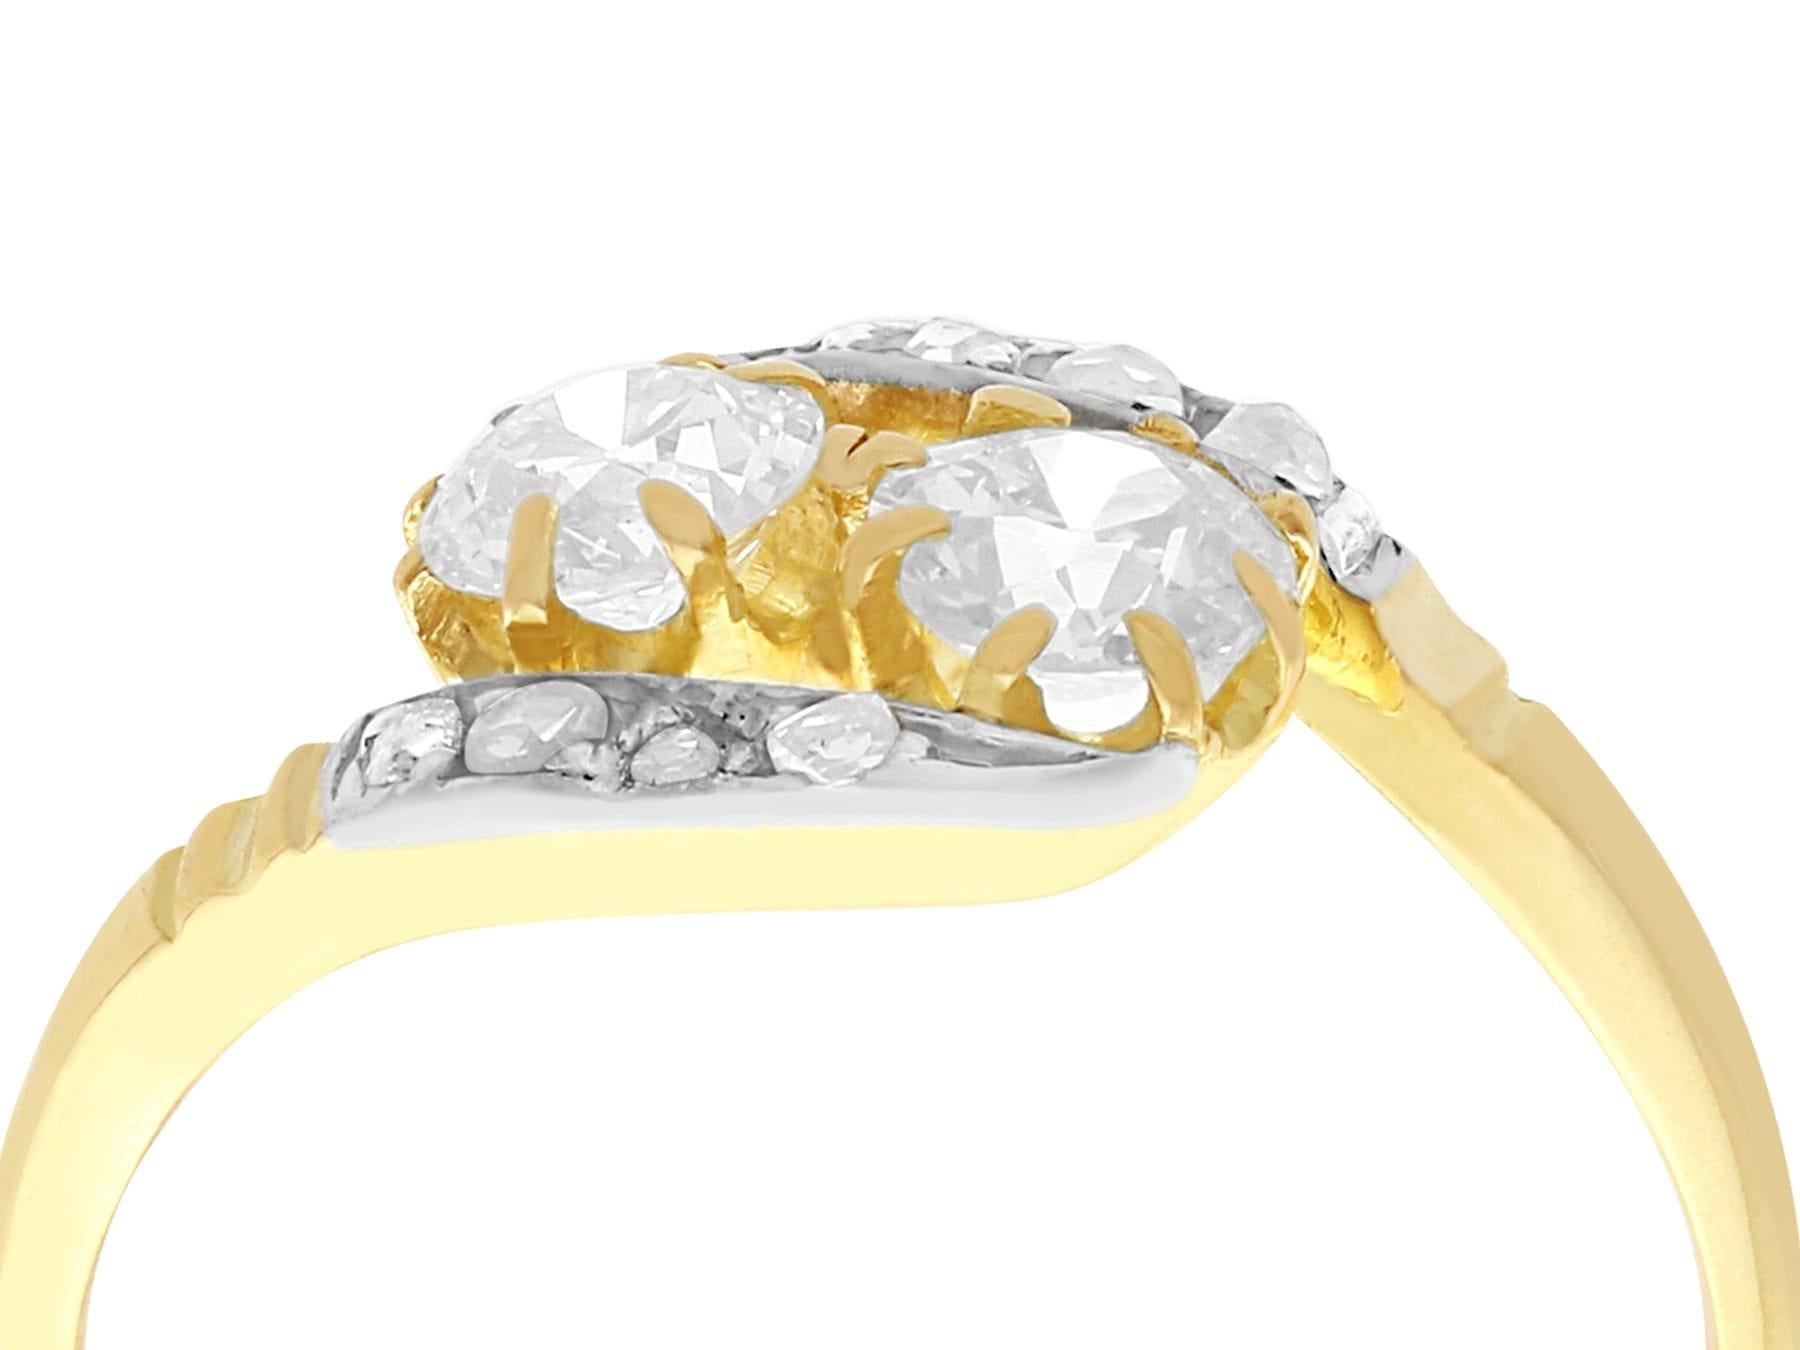 A fine and impressive antique 0.91 carat diamond and 18k yellow gold, silver set twist ring; an addition to our antique jewelry collection.

This impressive antique diamond twist ring has been crafted in 18k yellow gold with a silver setting.

The